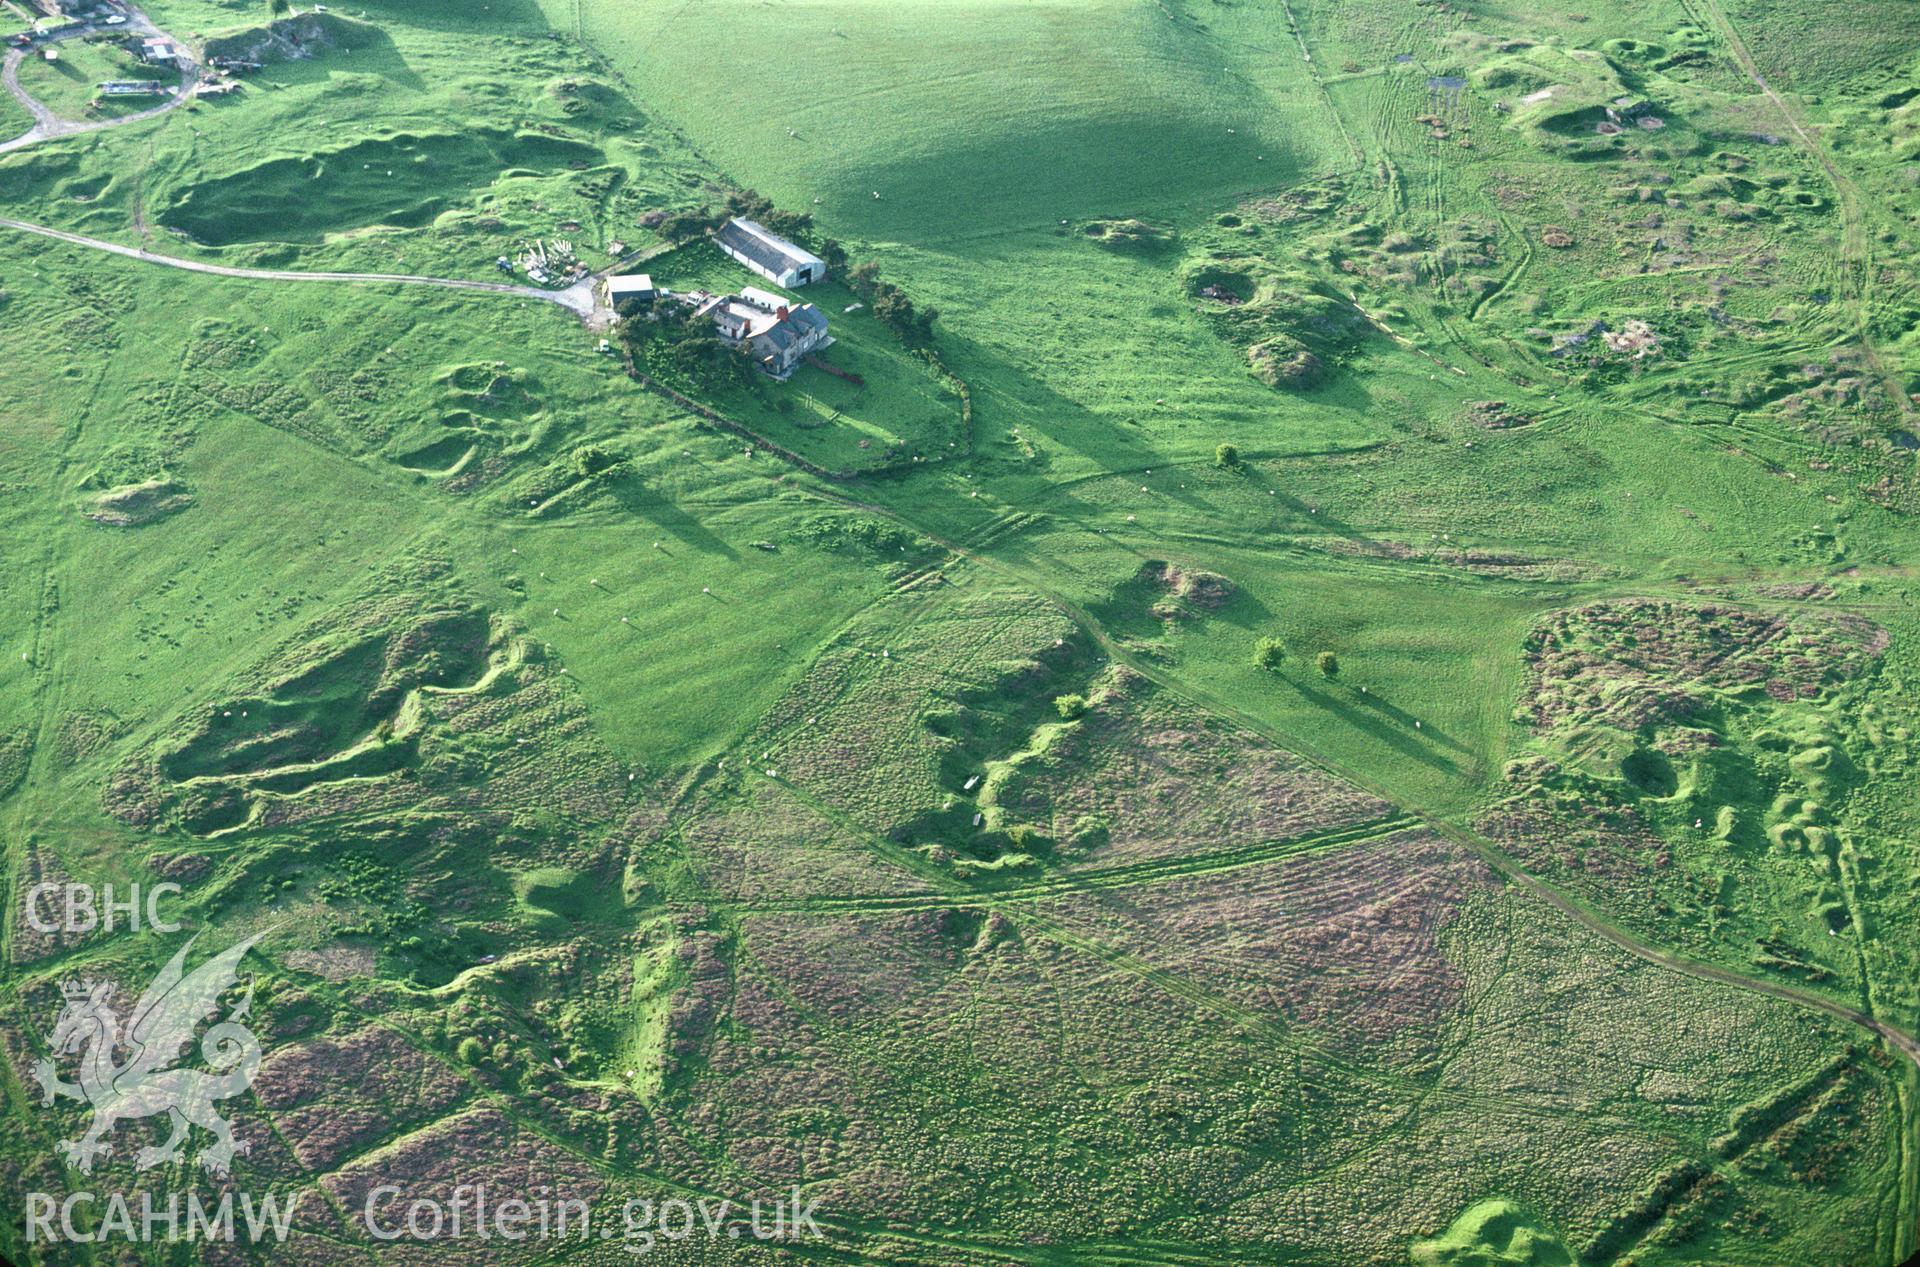 Slide of RCAHMW colour oblique aerial photograph of Halkyn Mine, taken by C.R. Musson, 21/5/1993.